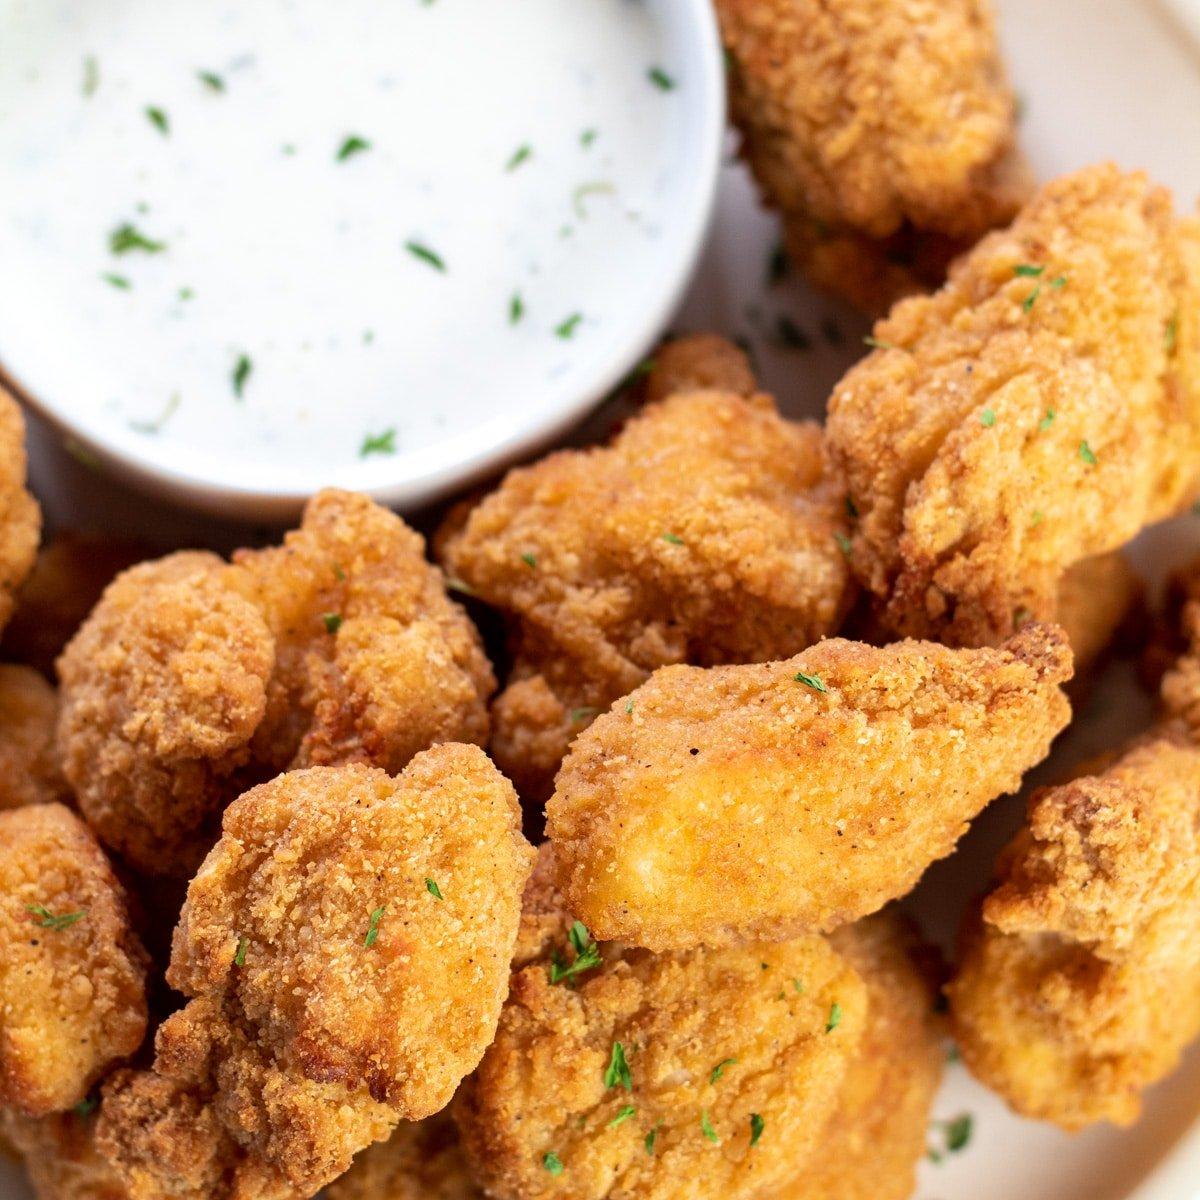 Crispy popcorn chicken is perfect for dipping!